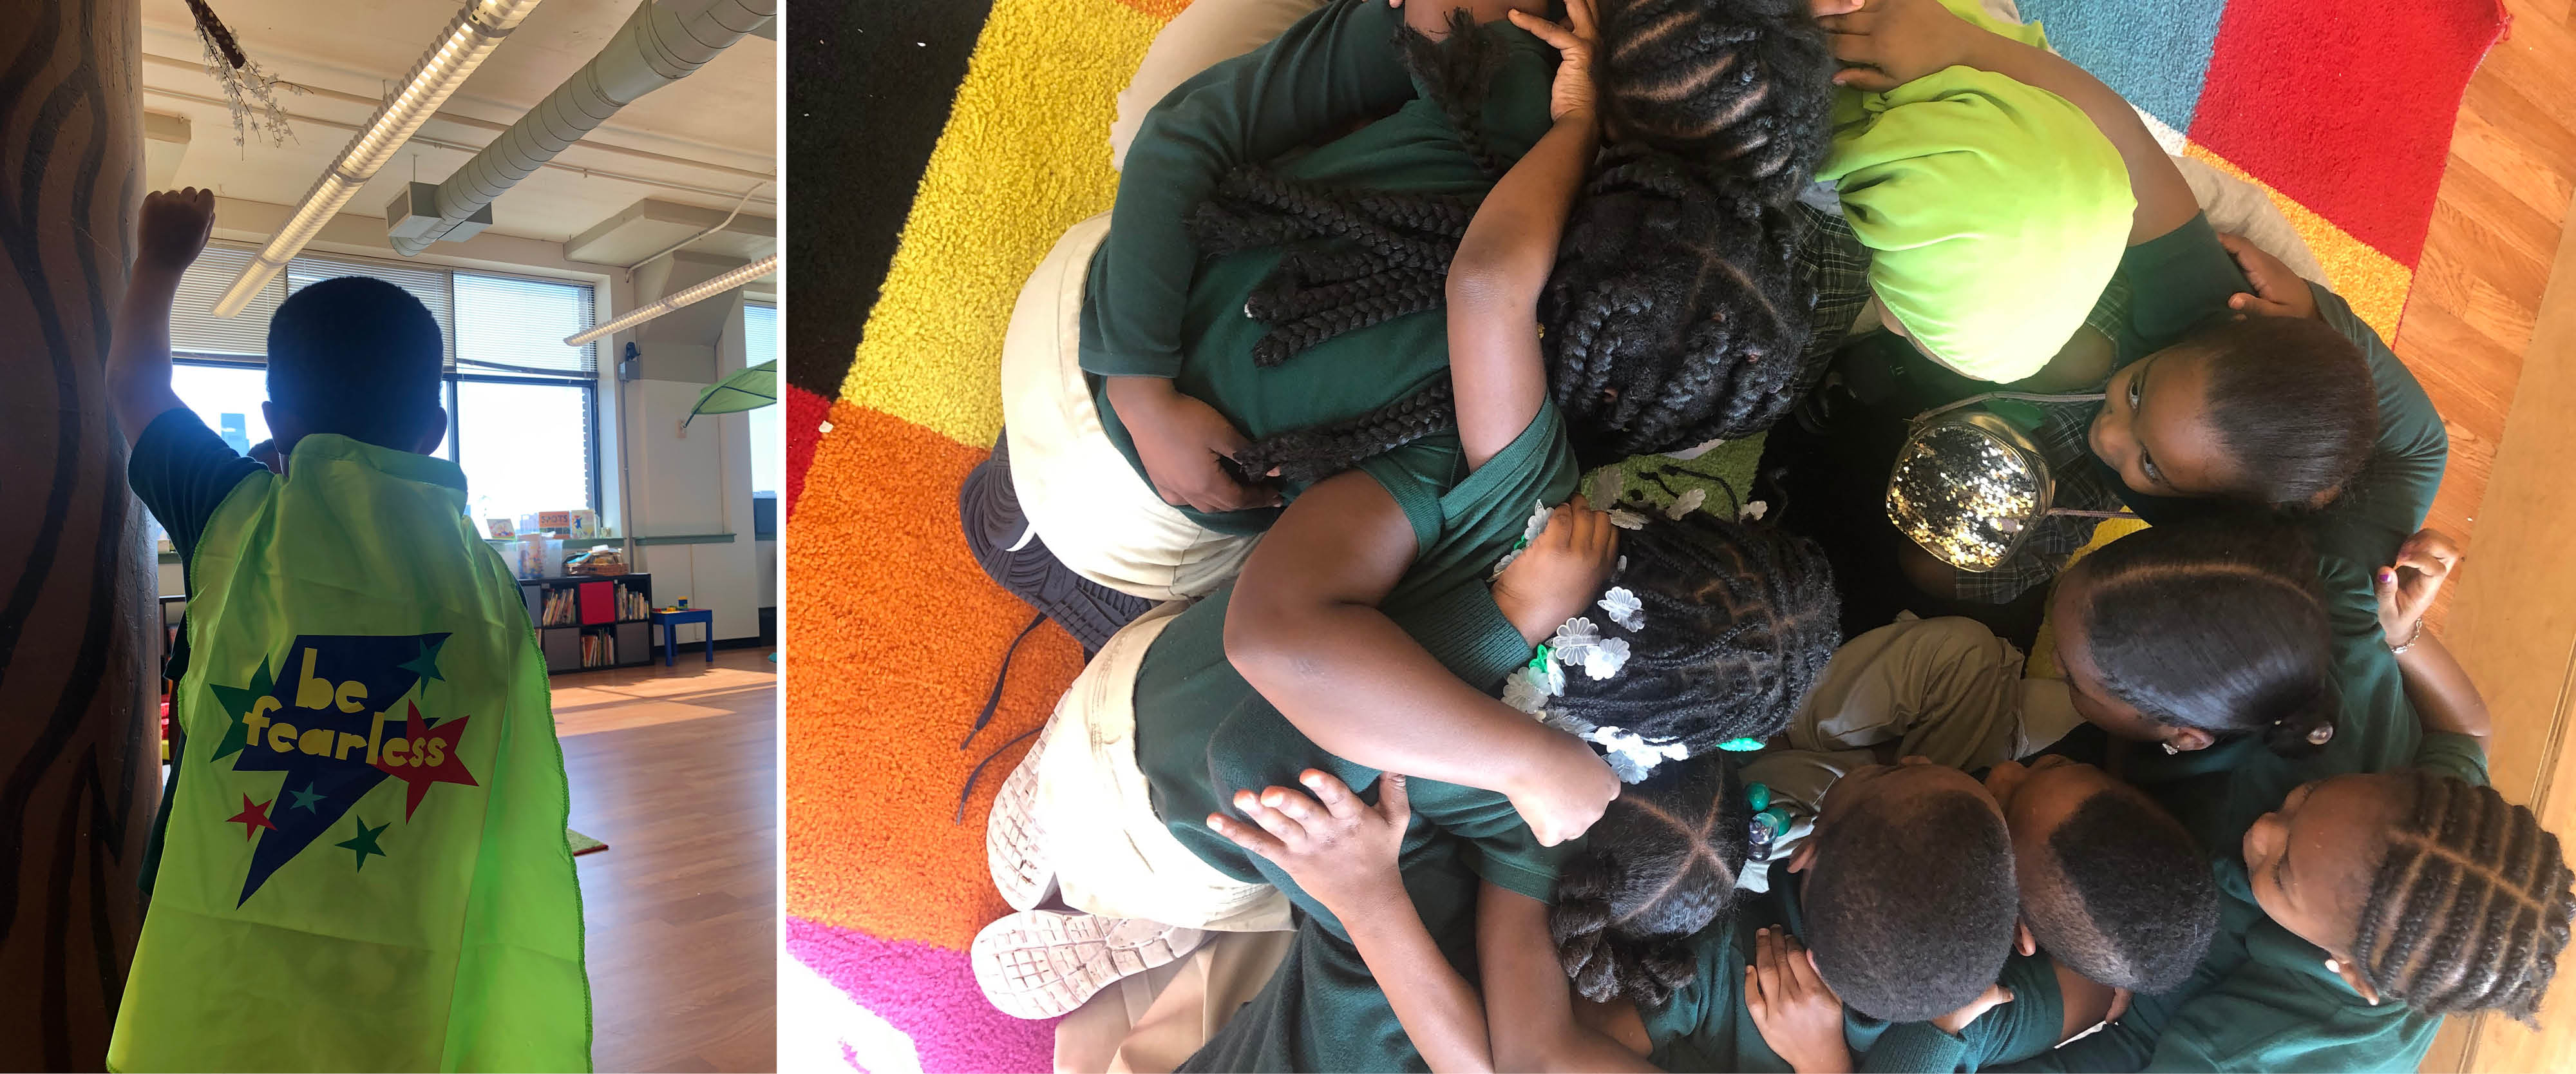 Two photos: on the left a child with a green cape on with words "Be fearless". On the right,children gathered to a group hug.